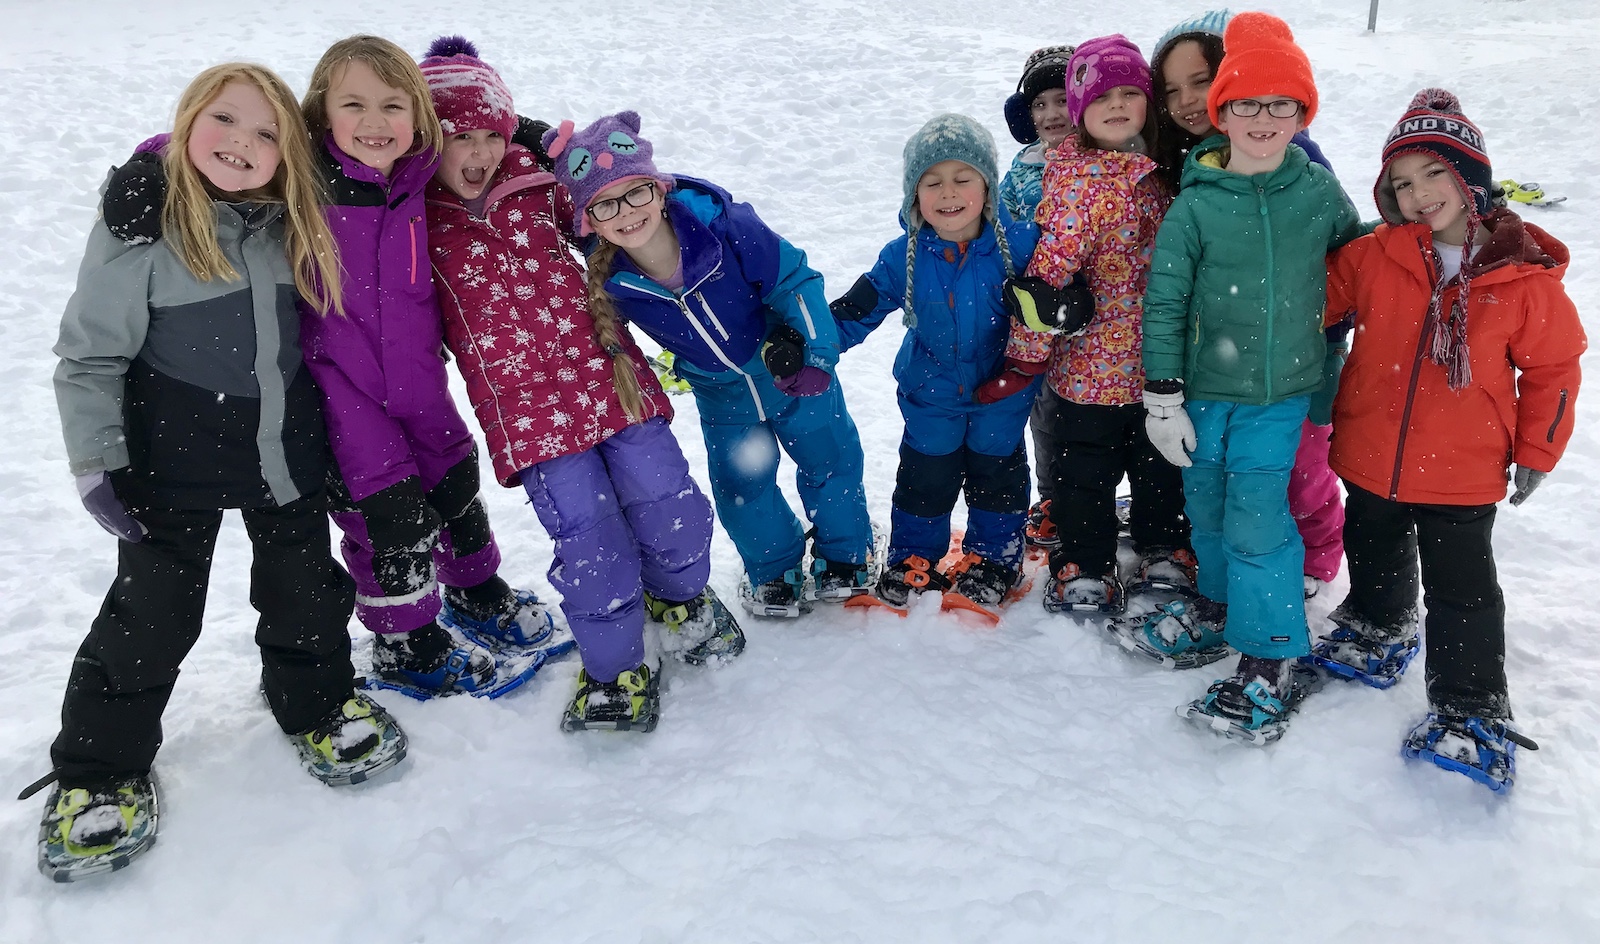 WinterKids 4th annual Winter Games kick off this week